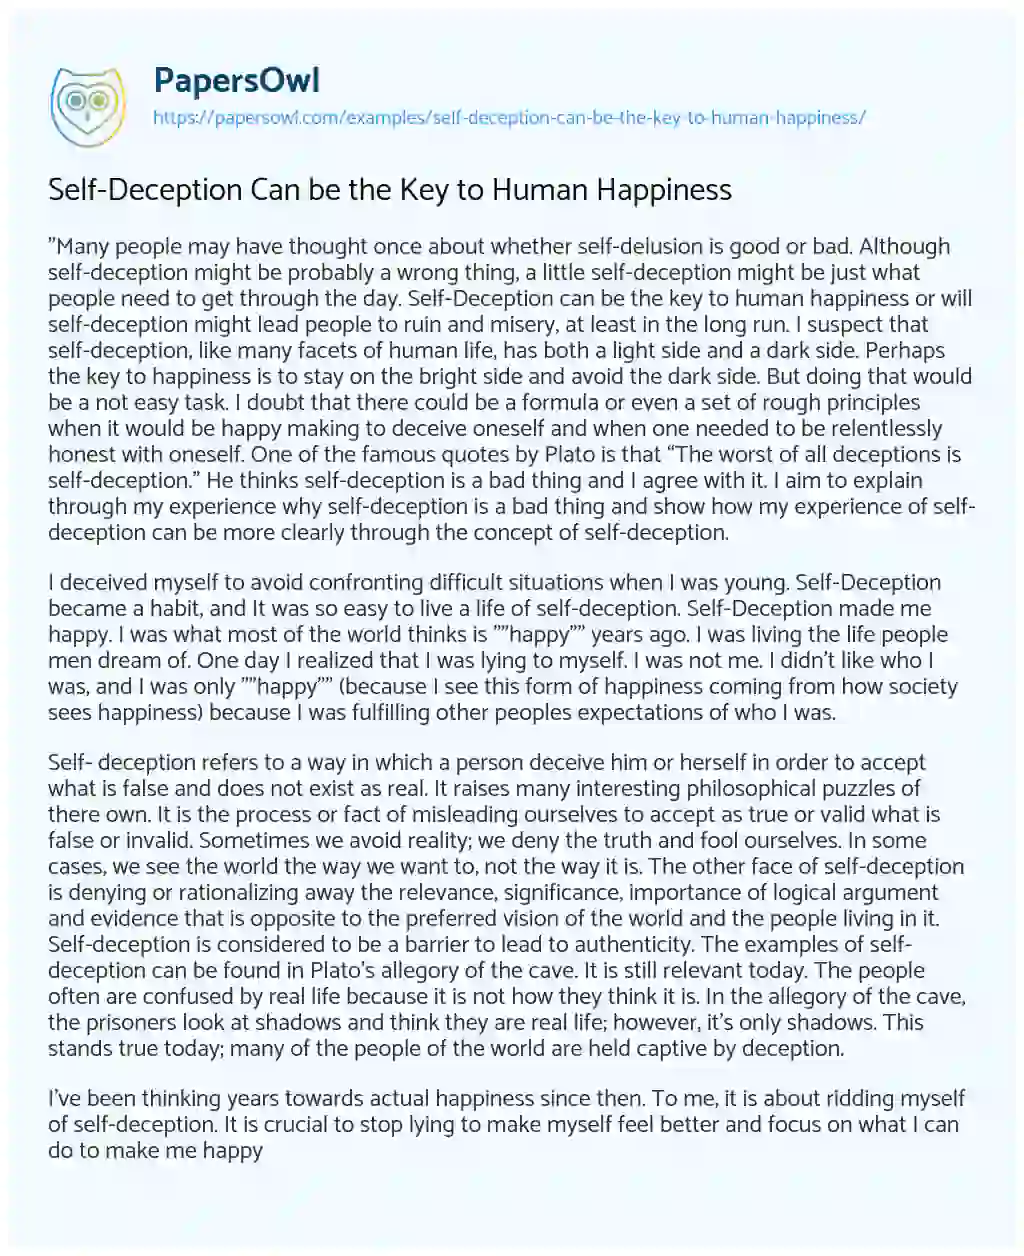 Self-Deception Can be the Key to Human Happiness essay